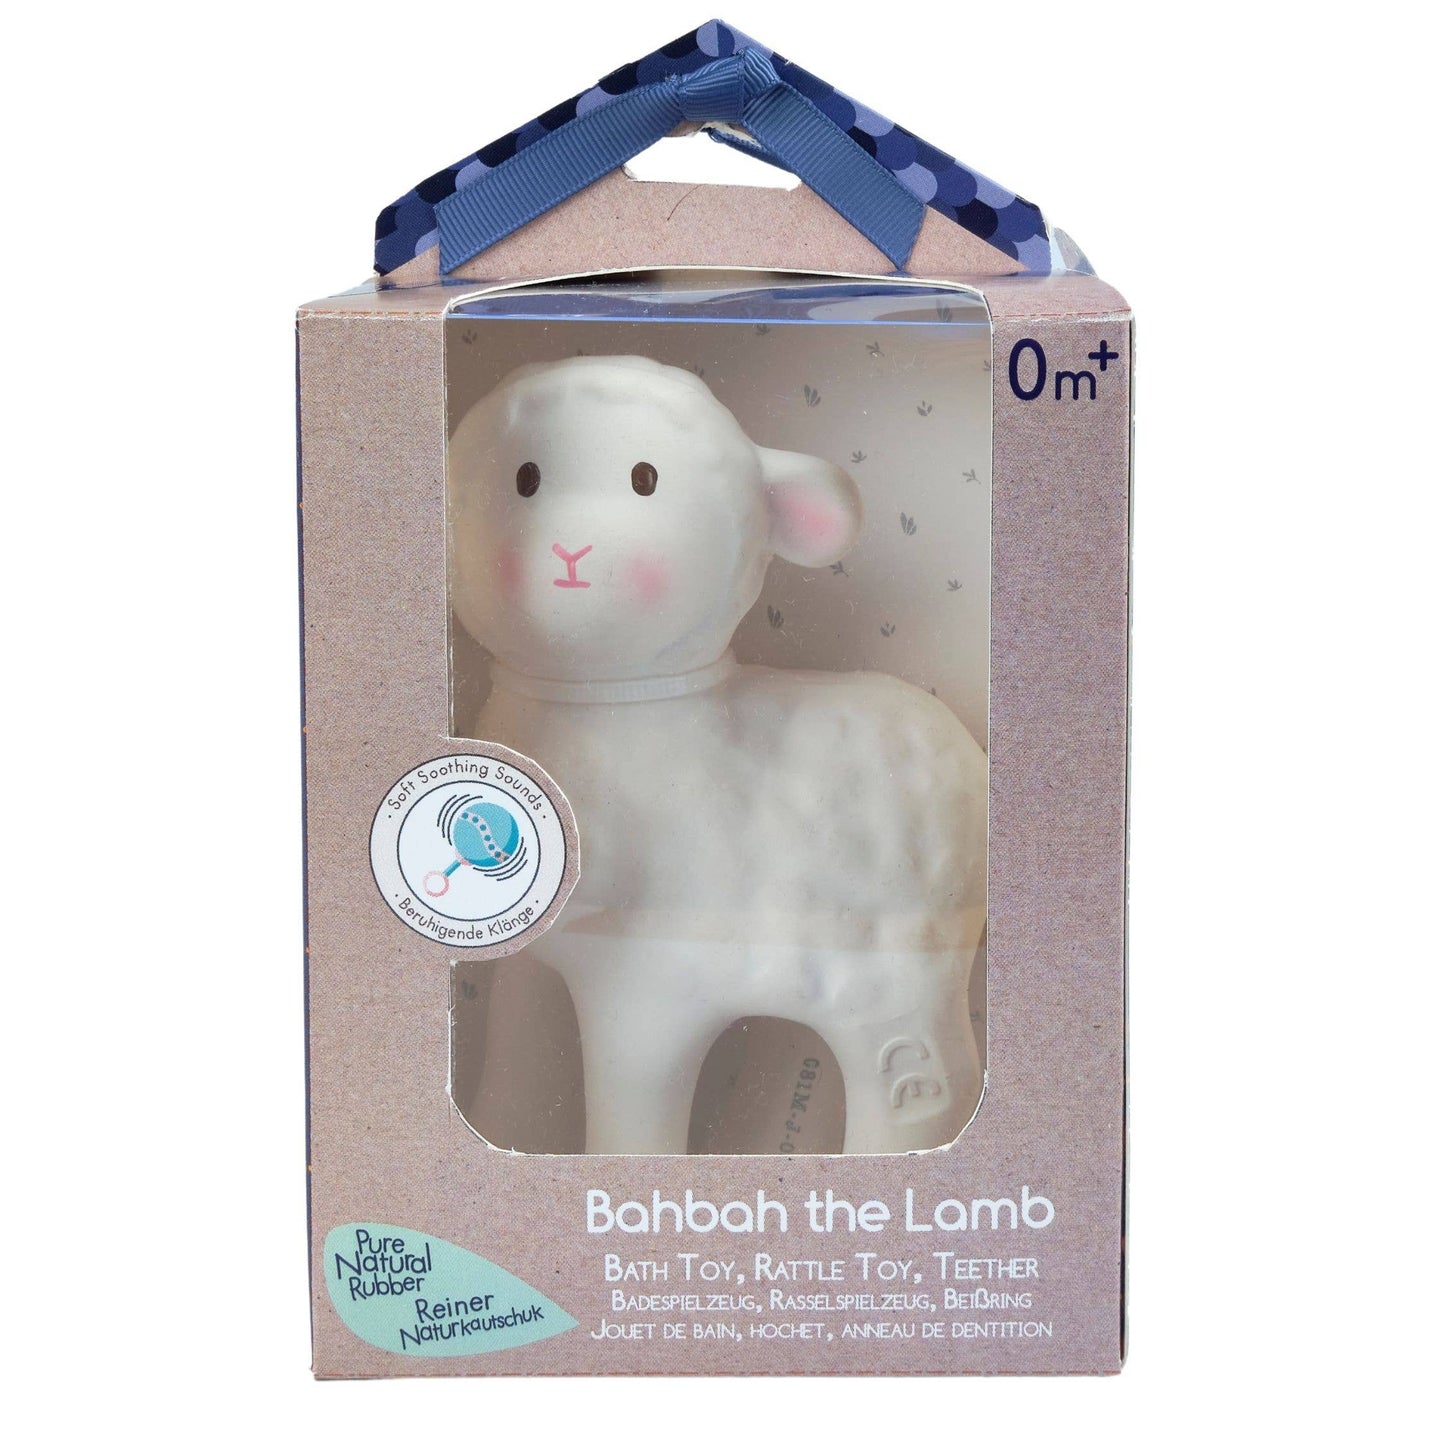 Bahbah the Lamb Organic Rubber Teether and Rattle